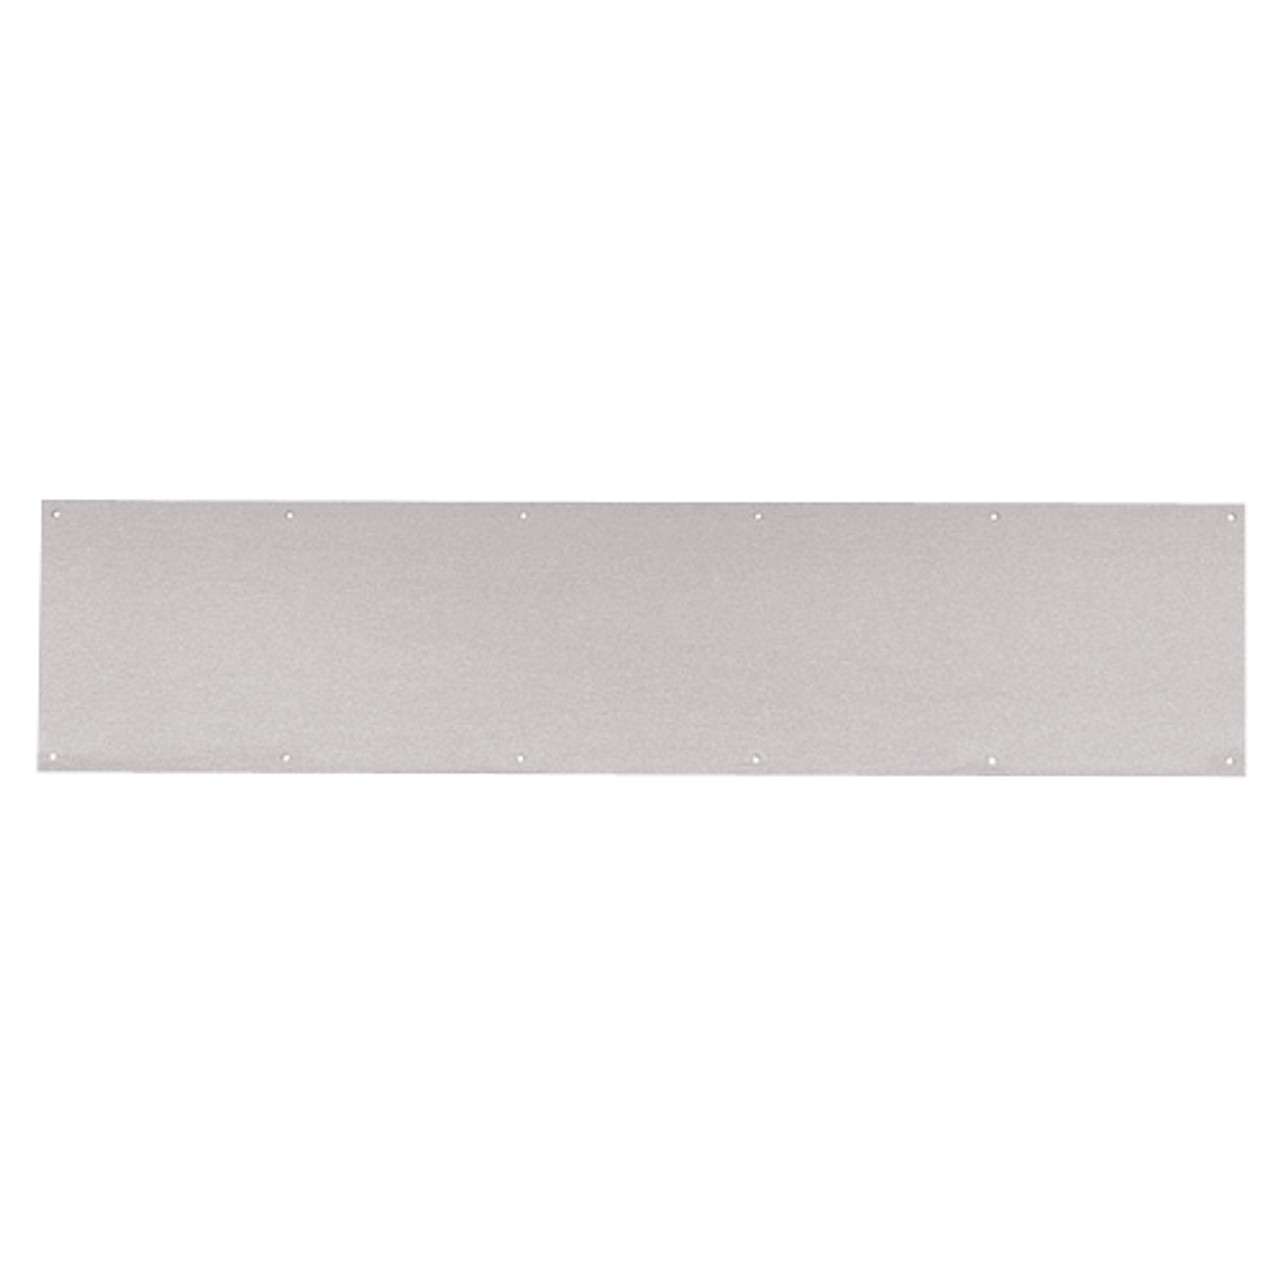 8400-US32D-10x20-B-CS Ives 8400 Series Protection Plate in Satin Stainless Steel